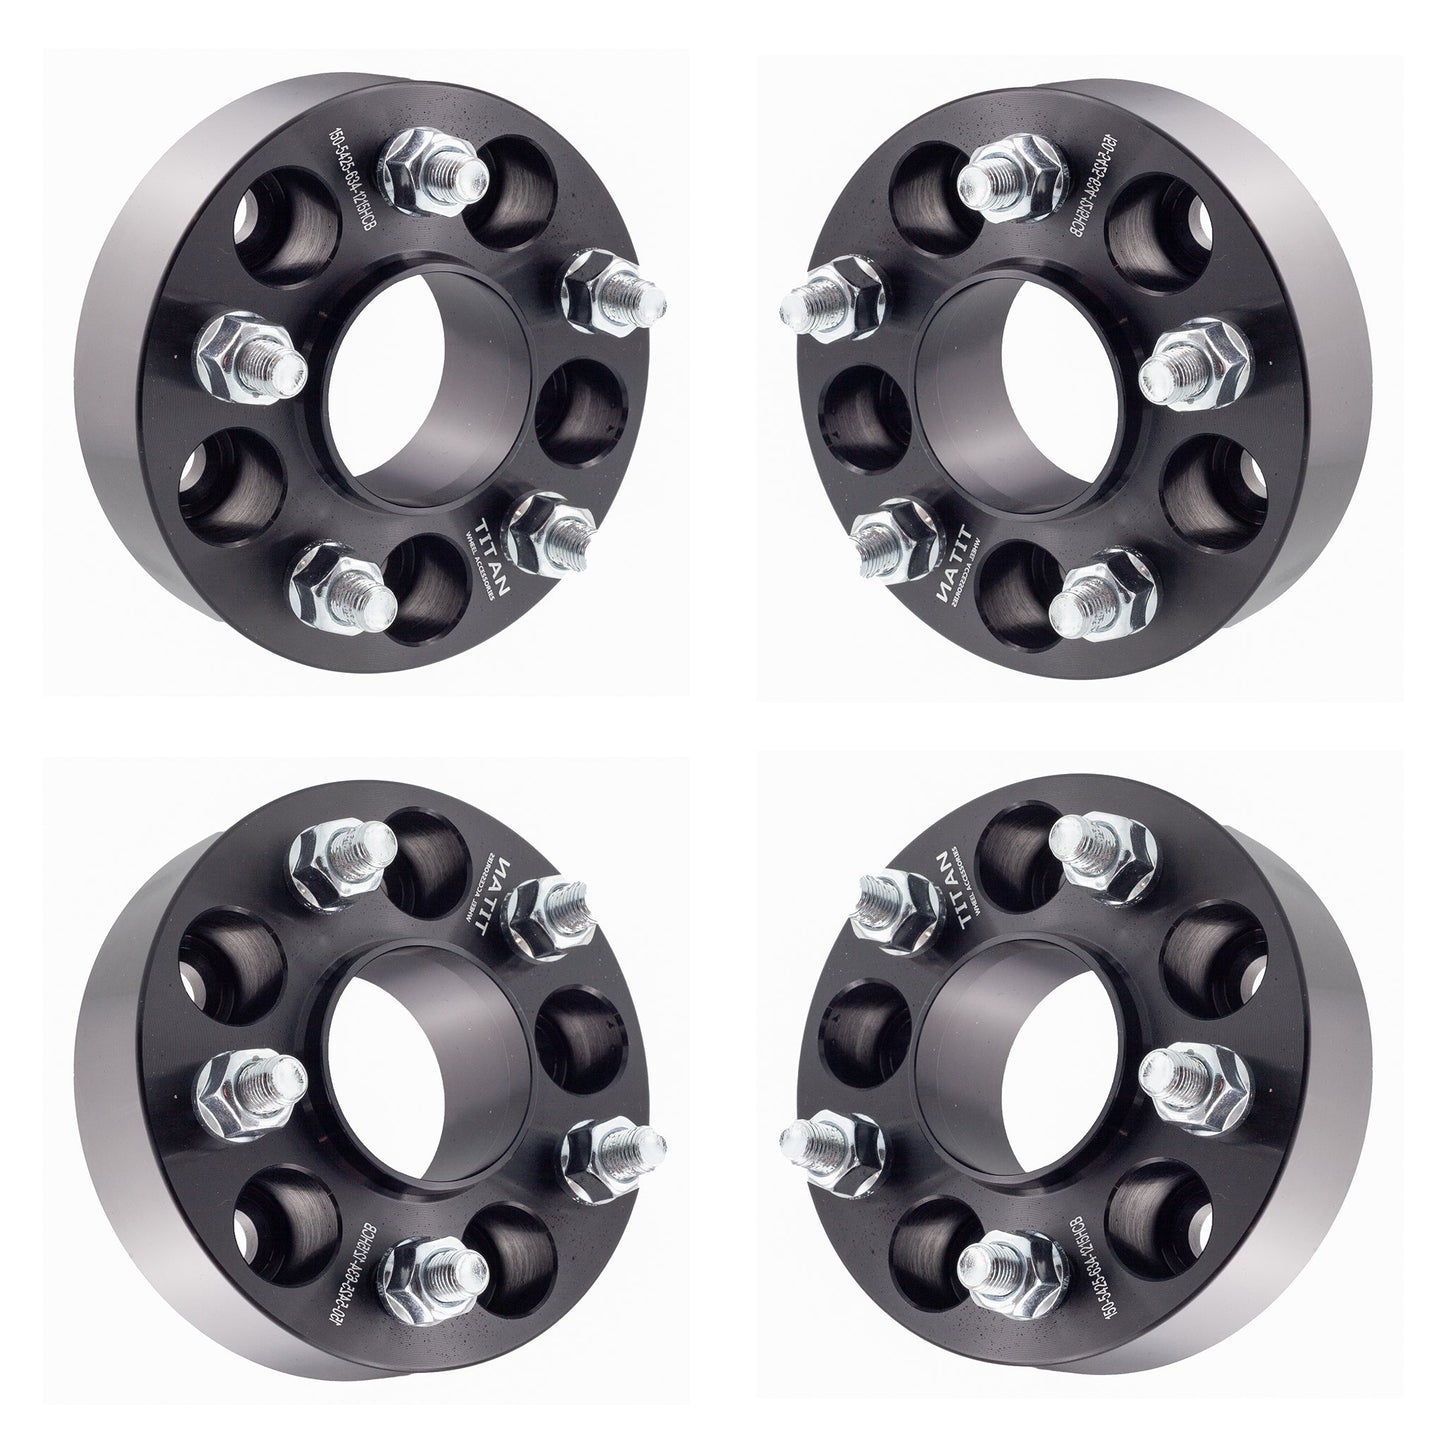 1.5" (38mm) Titan Wheel Spacers for Volvo C30 C70 S40 V50 | 5x4.25 (5x108) | 63.4 Hubcentric | 12x1.5 Studs |  Set of 4 | Titan Wheel Accessories